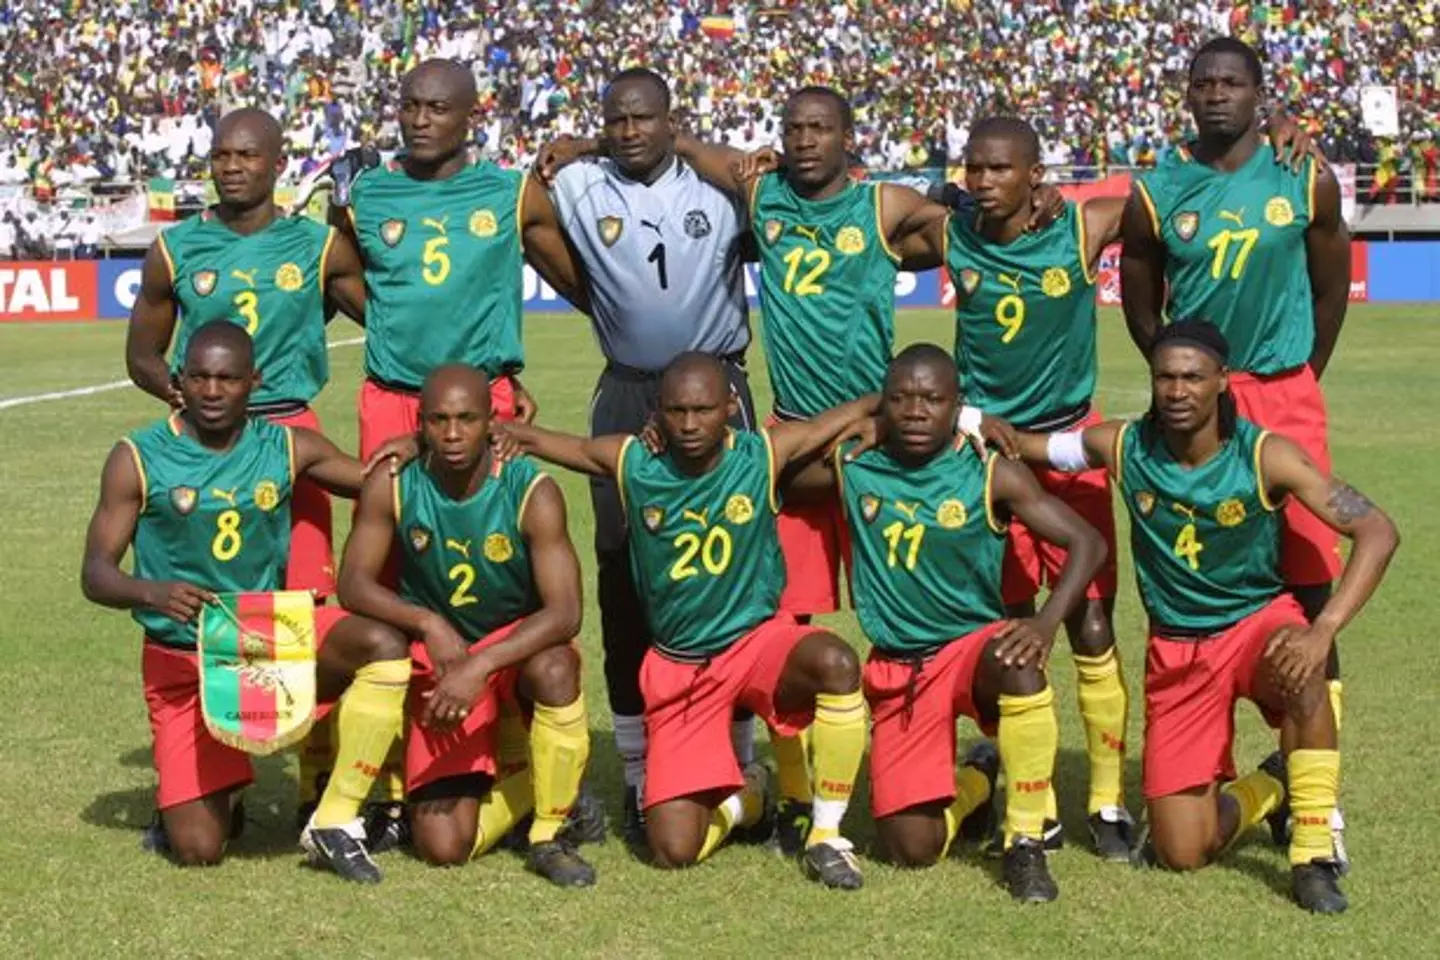 Cameroon won the Africa Cup of Nations in style. Image credit: The Daily Star